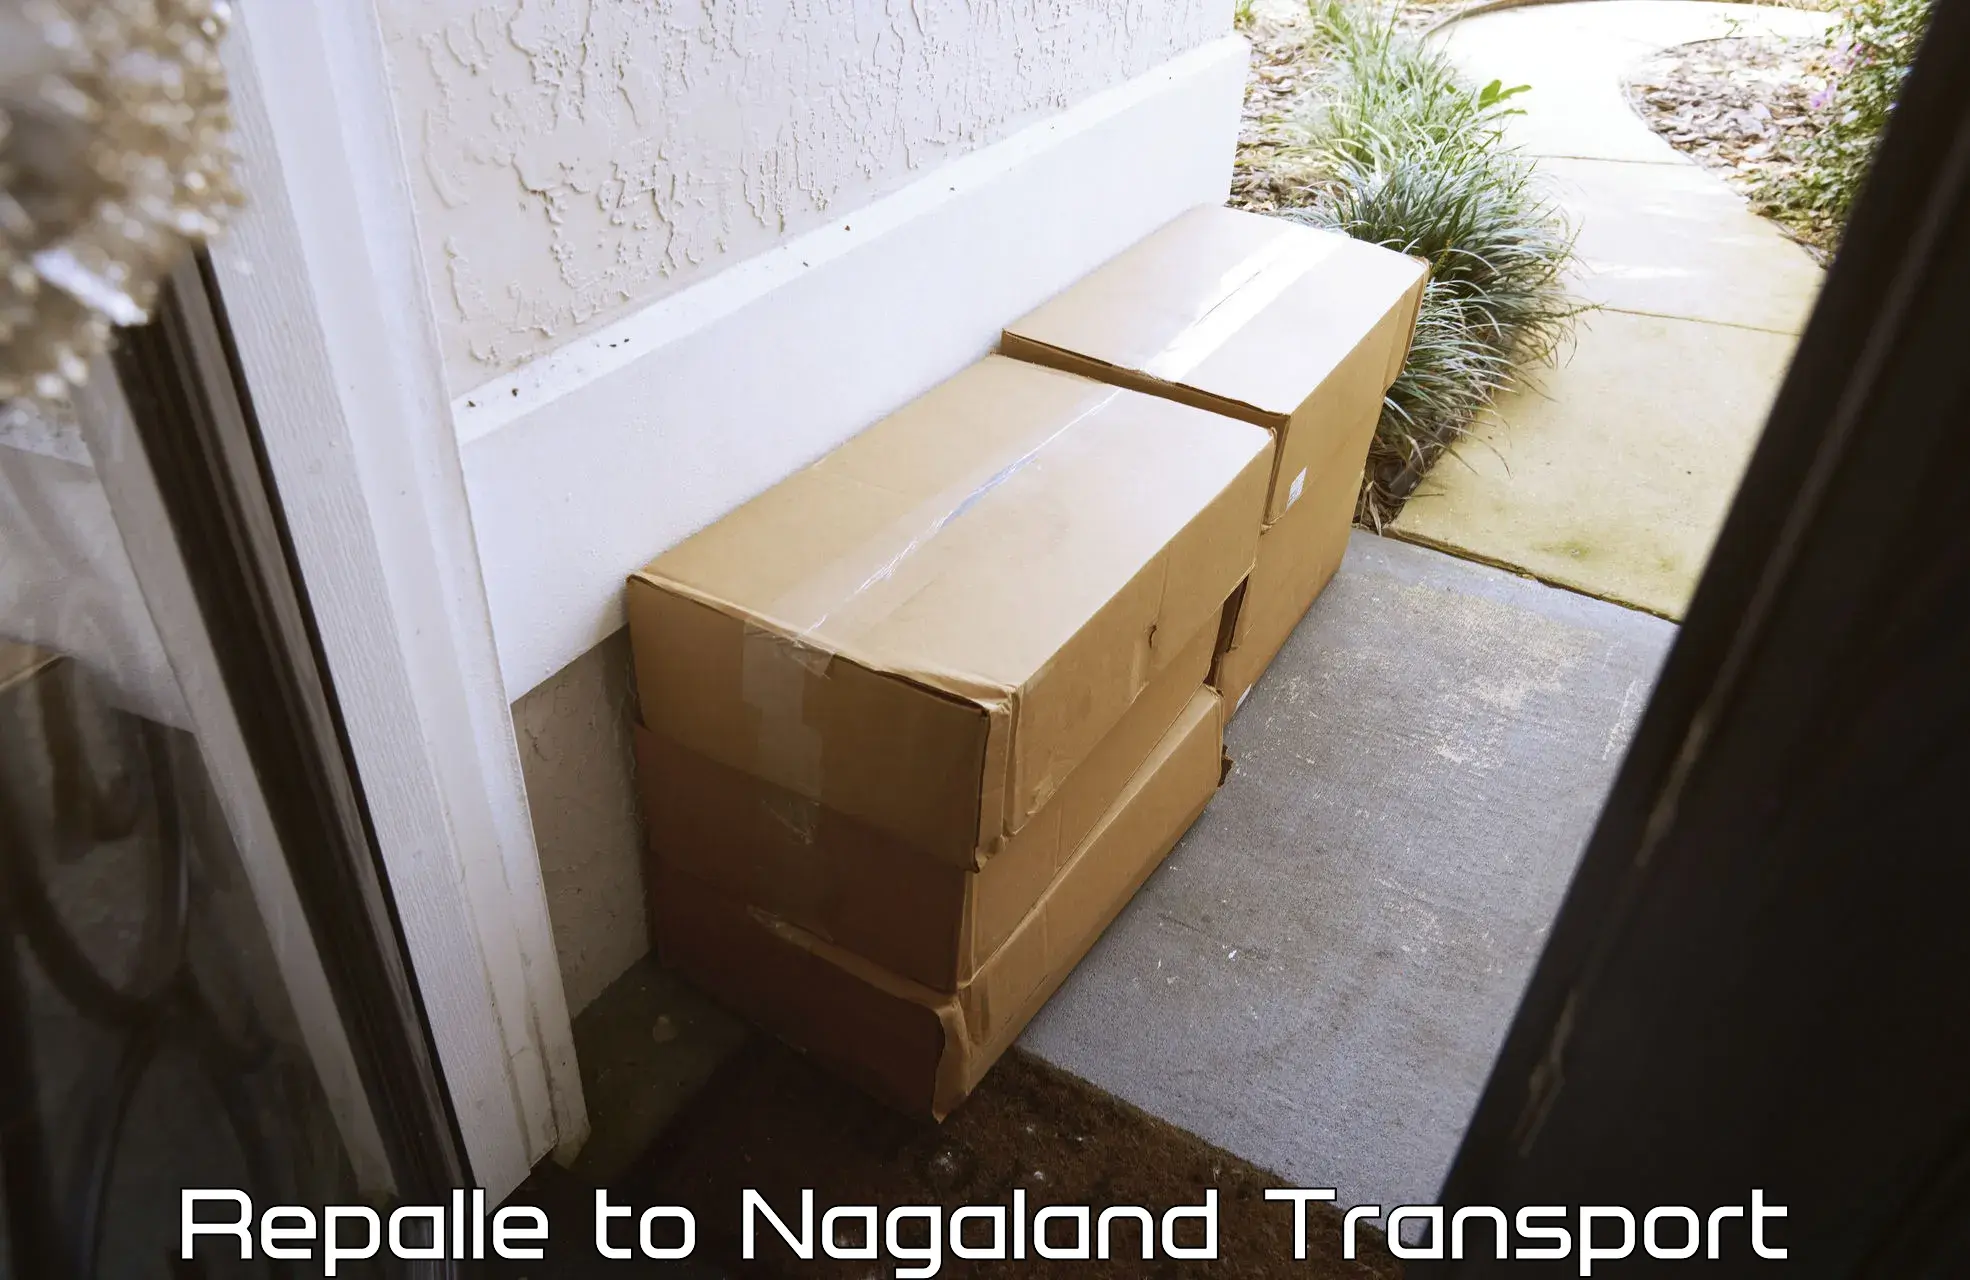 Vehicle parcel service Repalle to Nagaland